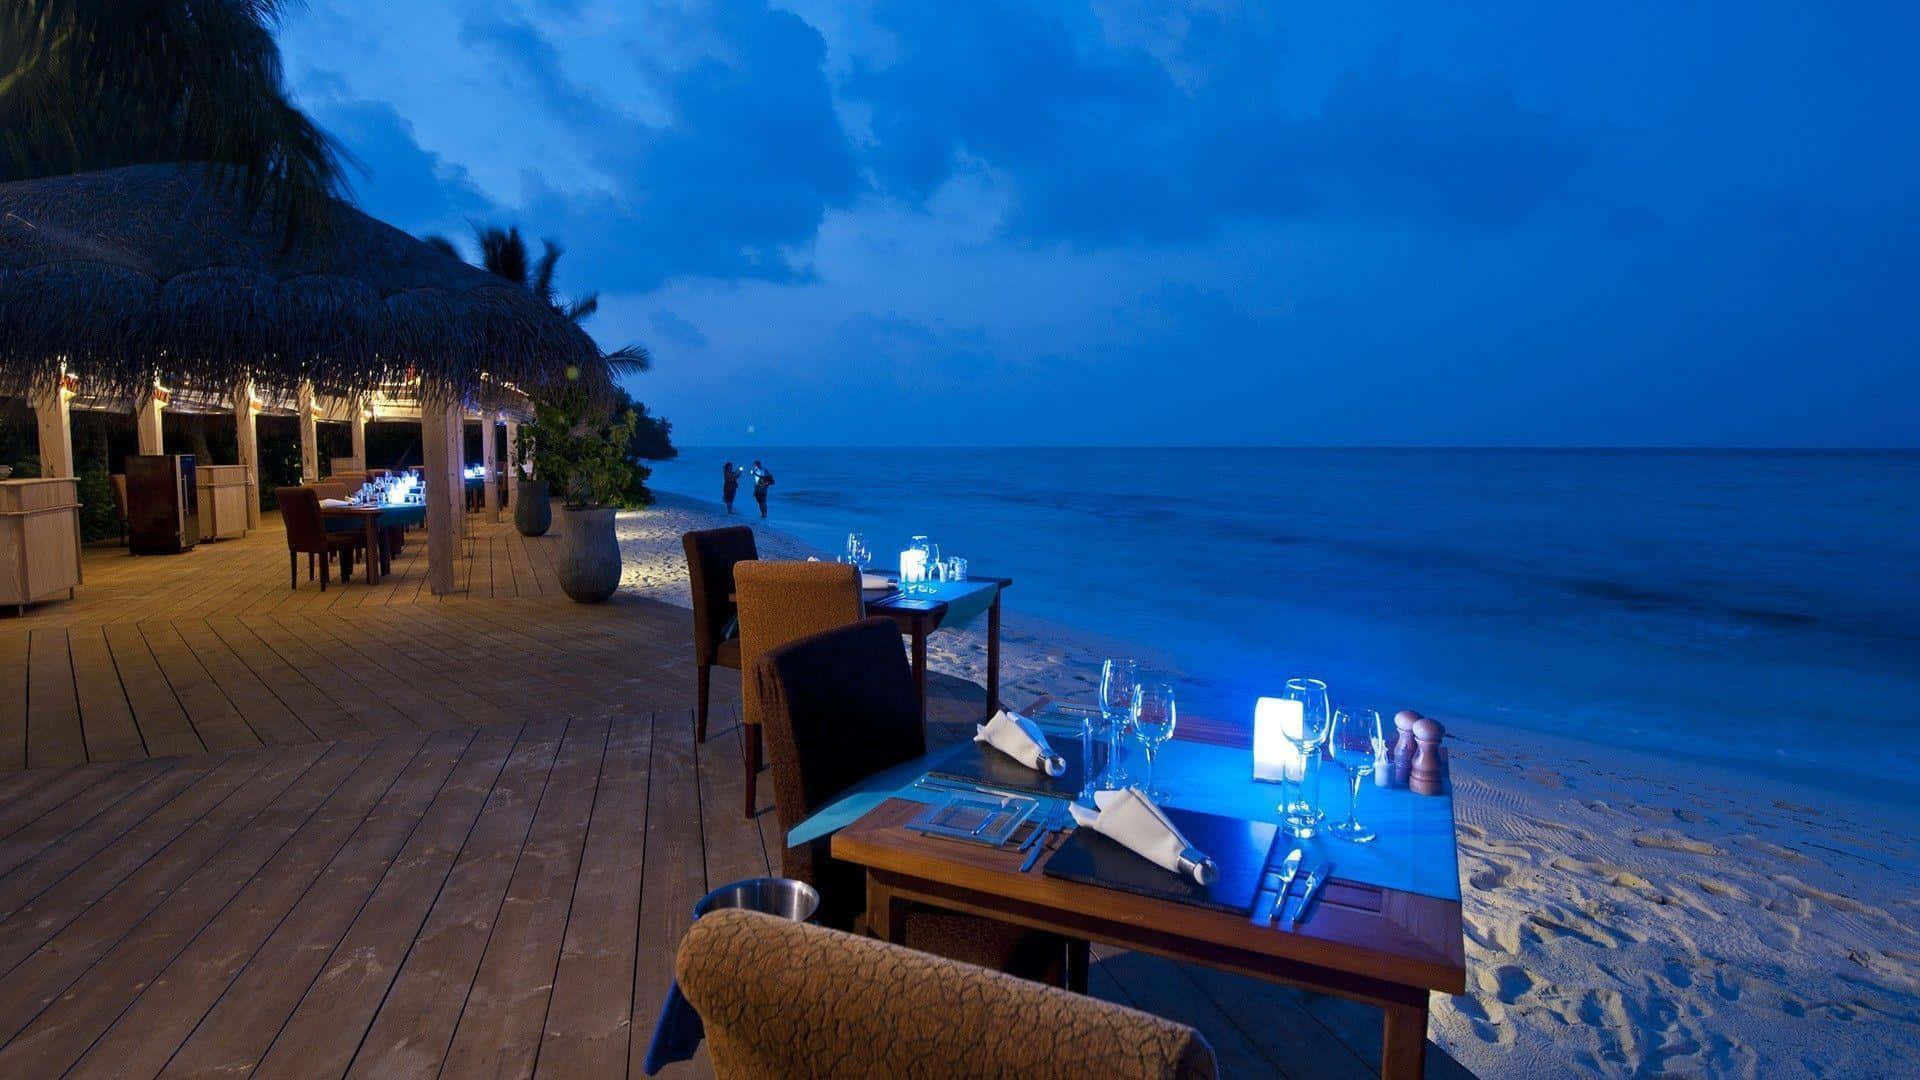 A Restaurant On The Beach At Night